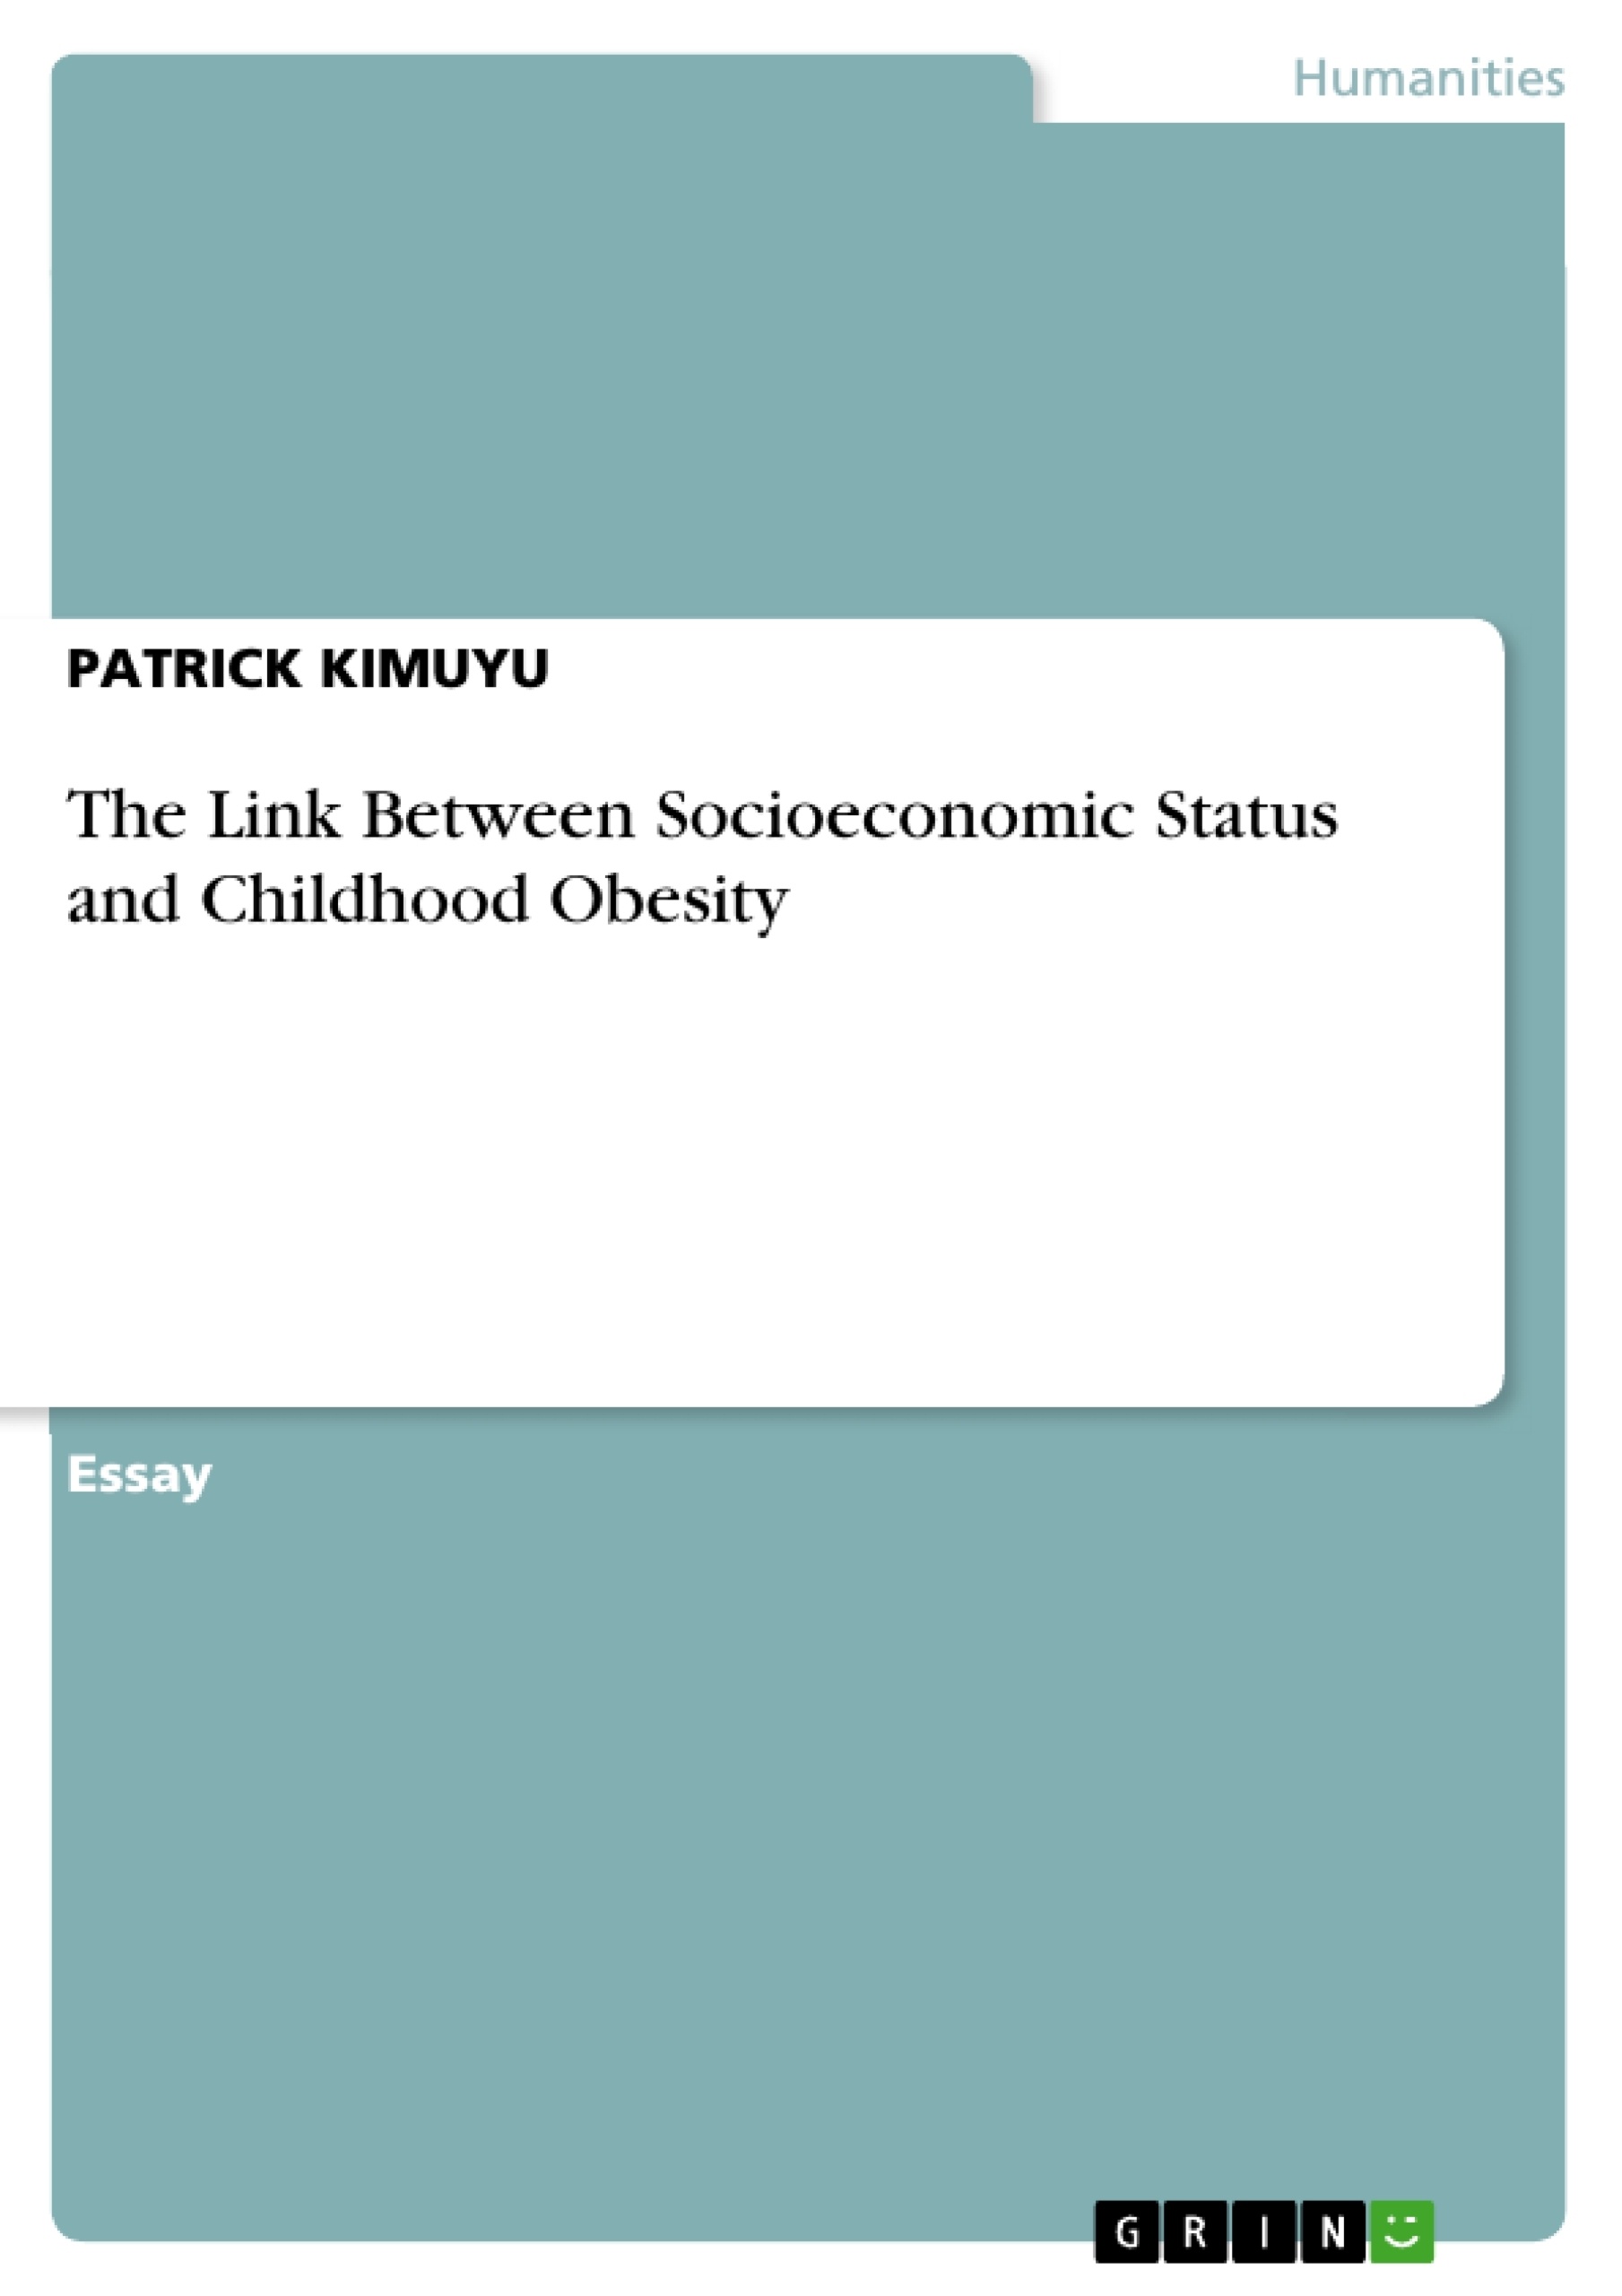 Title: The Link Between Socioeconomic Status and Childhood Obesity